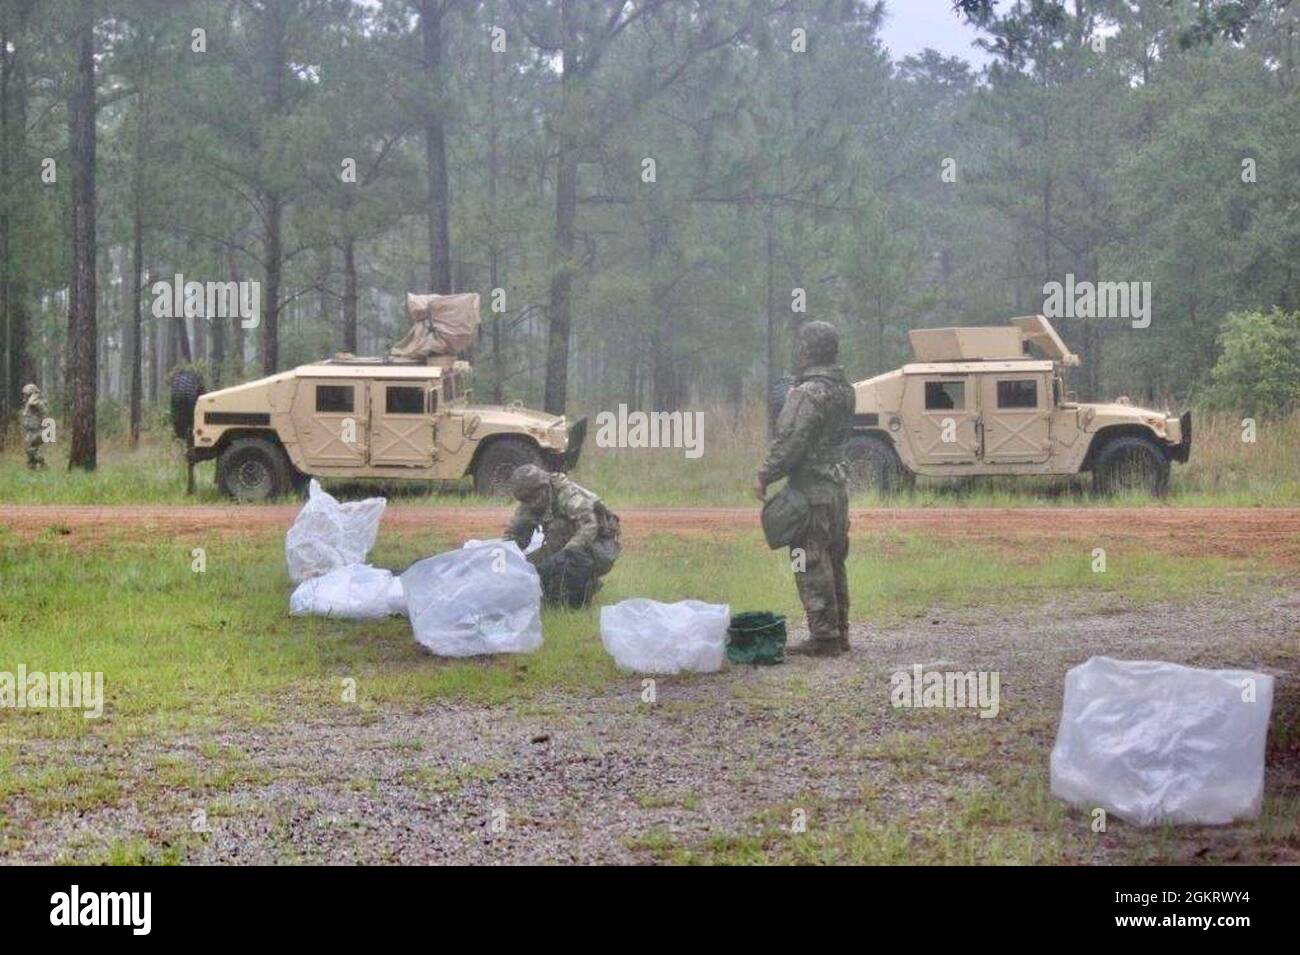 Army Reserve Soldiers from the 415th Chemical Brigade, set up a hasty decontamination site at a Fort Stewart training area on June 23 during a daytime mission as part of Exercise Rote Drache. The exercise brought together more than 1000 Army Reserve Soldiers from 16 states around the country to conduct two-weeks of Army Warrior Tasks and Military Occupational Speciality (MOS) training at Fort Stewart. (Official U.S. Army Reserve photo) Stock Photo